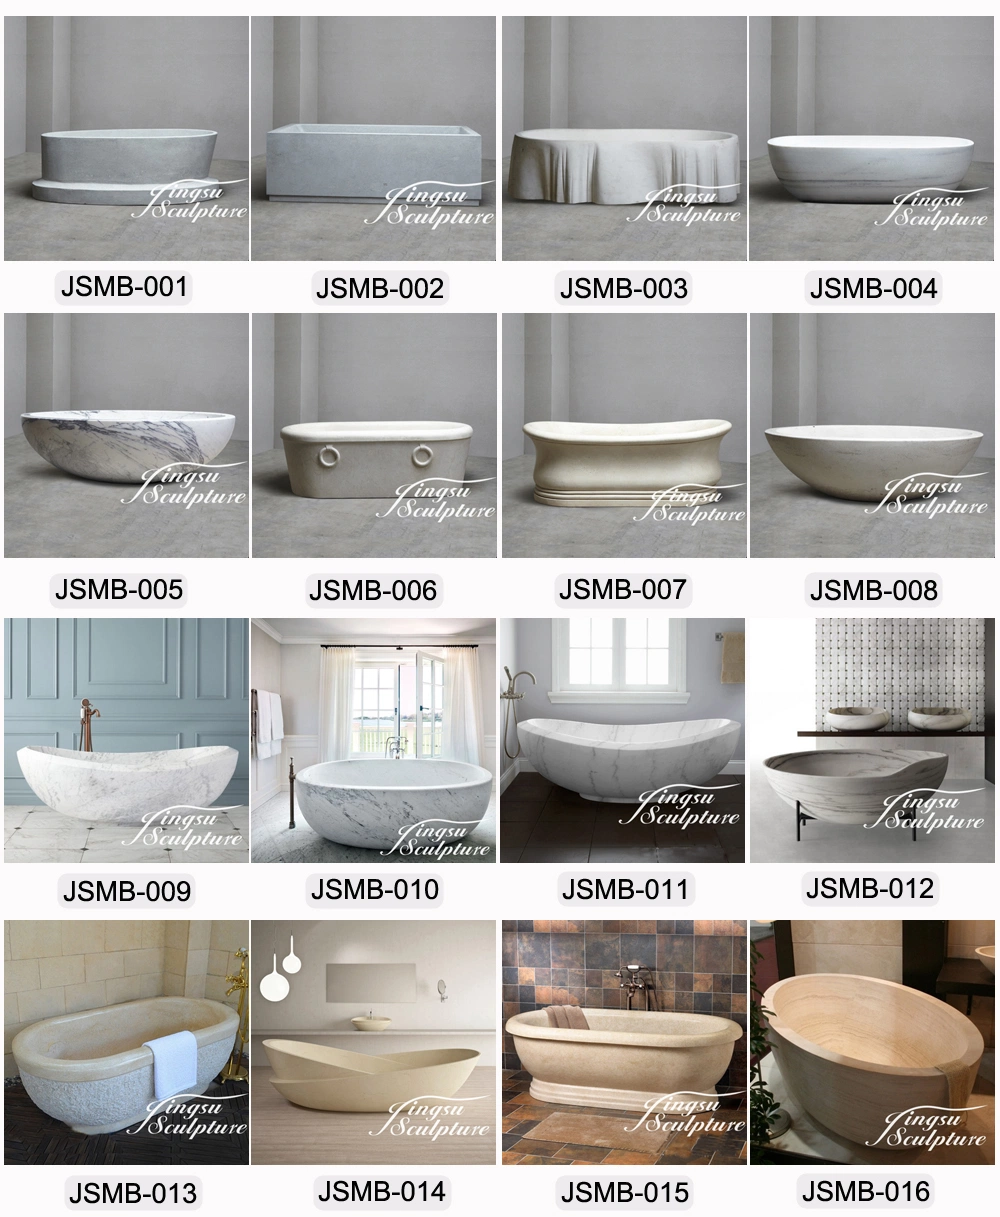 Factory Good Quality Professional Hand Carved Polishing Bathtub for Fat People